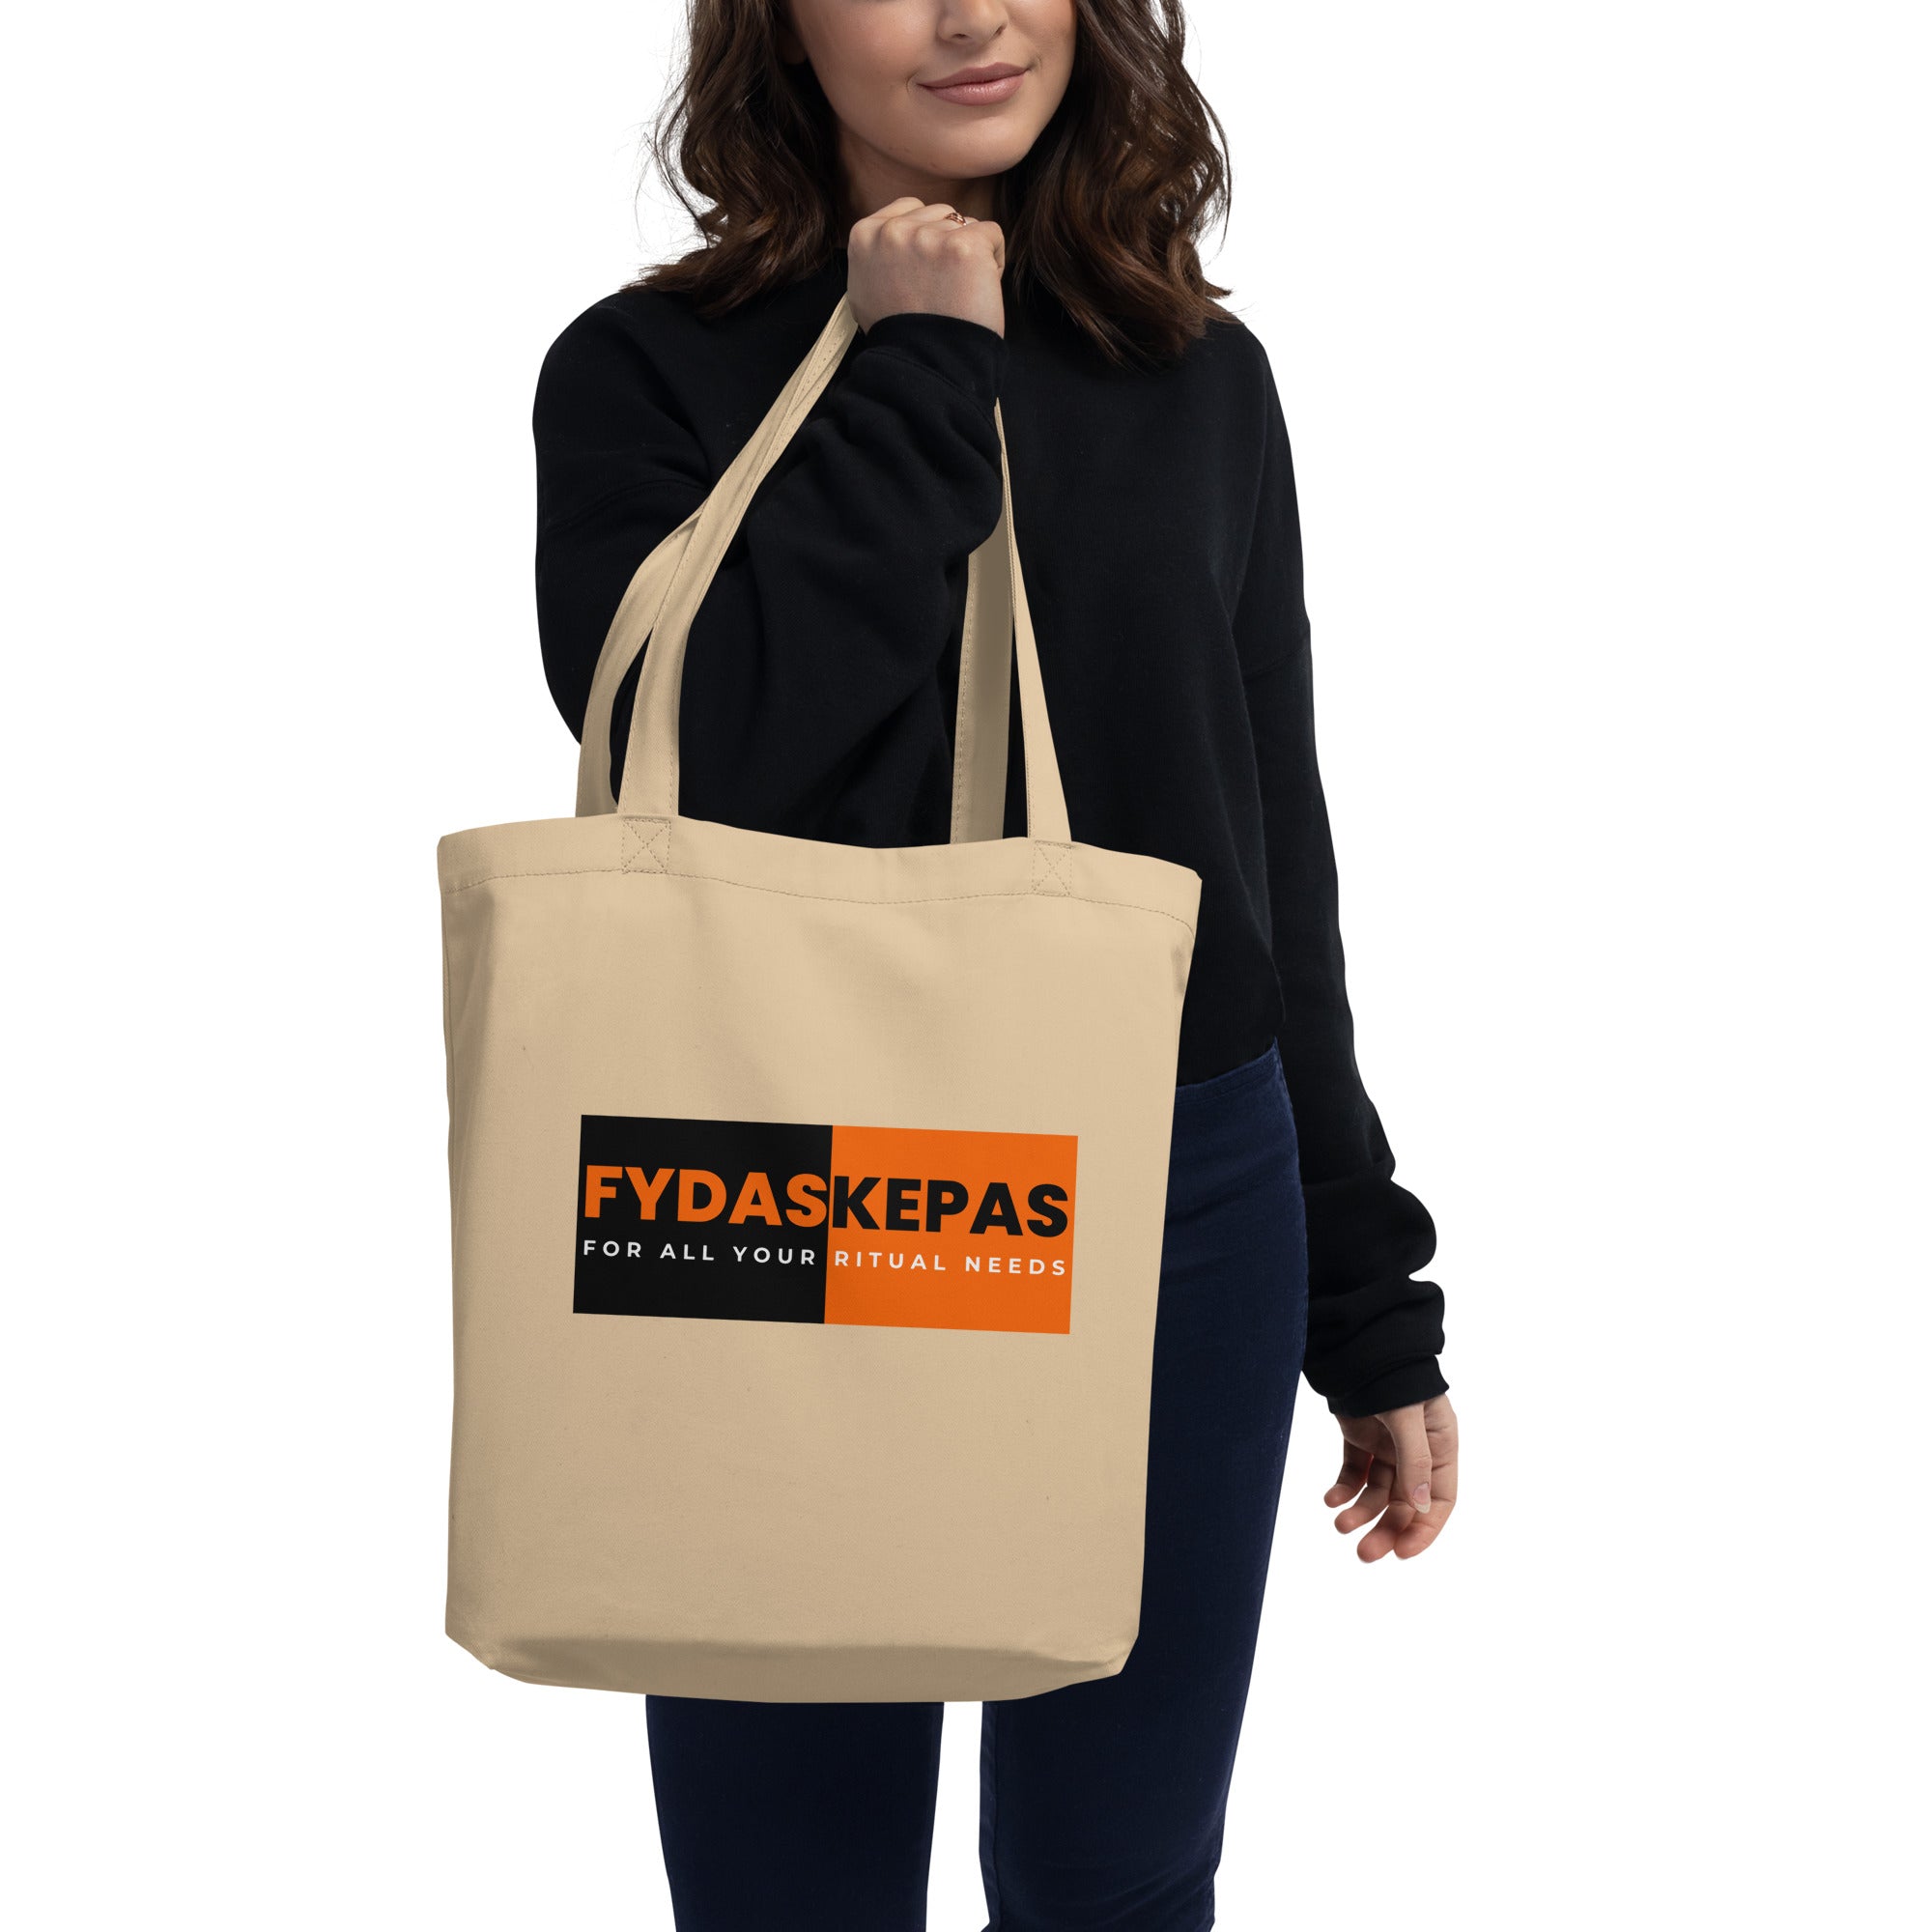 Spacious Tote Bag: Plenty of Room for Your Everyday Essentials - fydaskepas